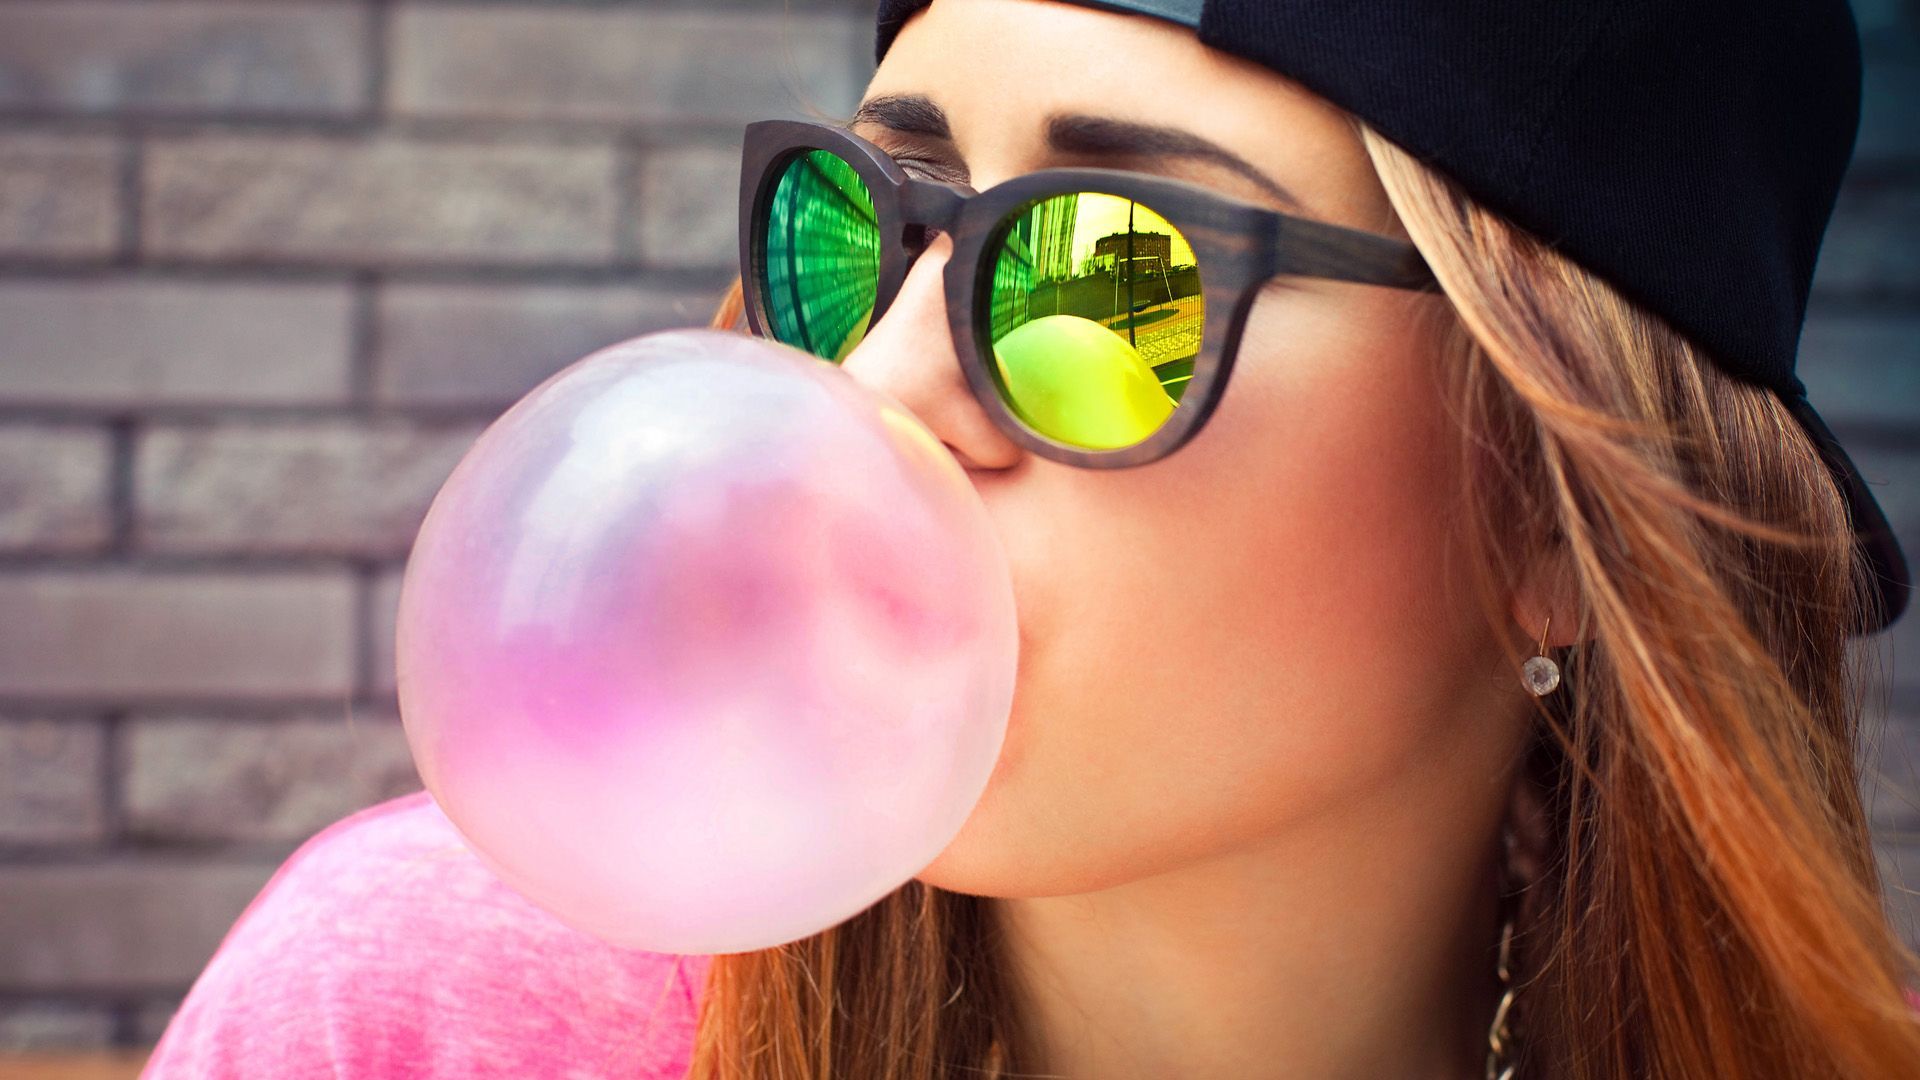 Stomach stuck? How dangerous is swallowed chewing gum really?